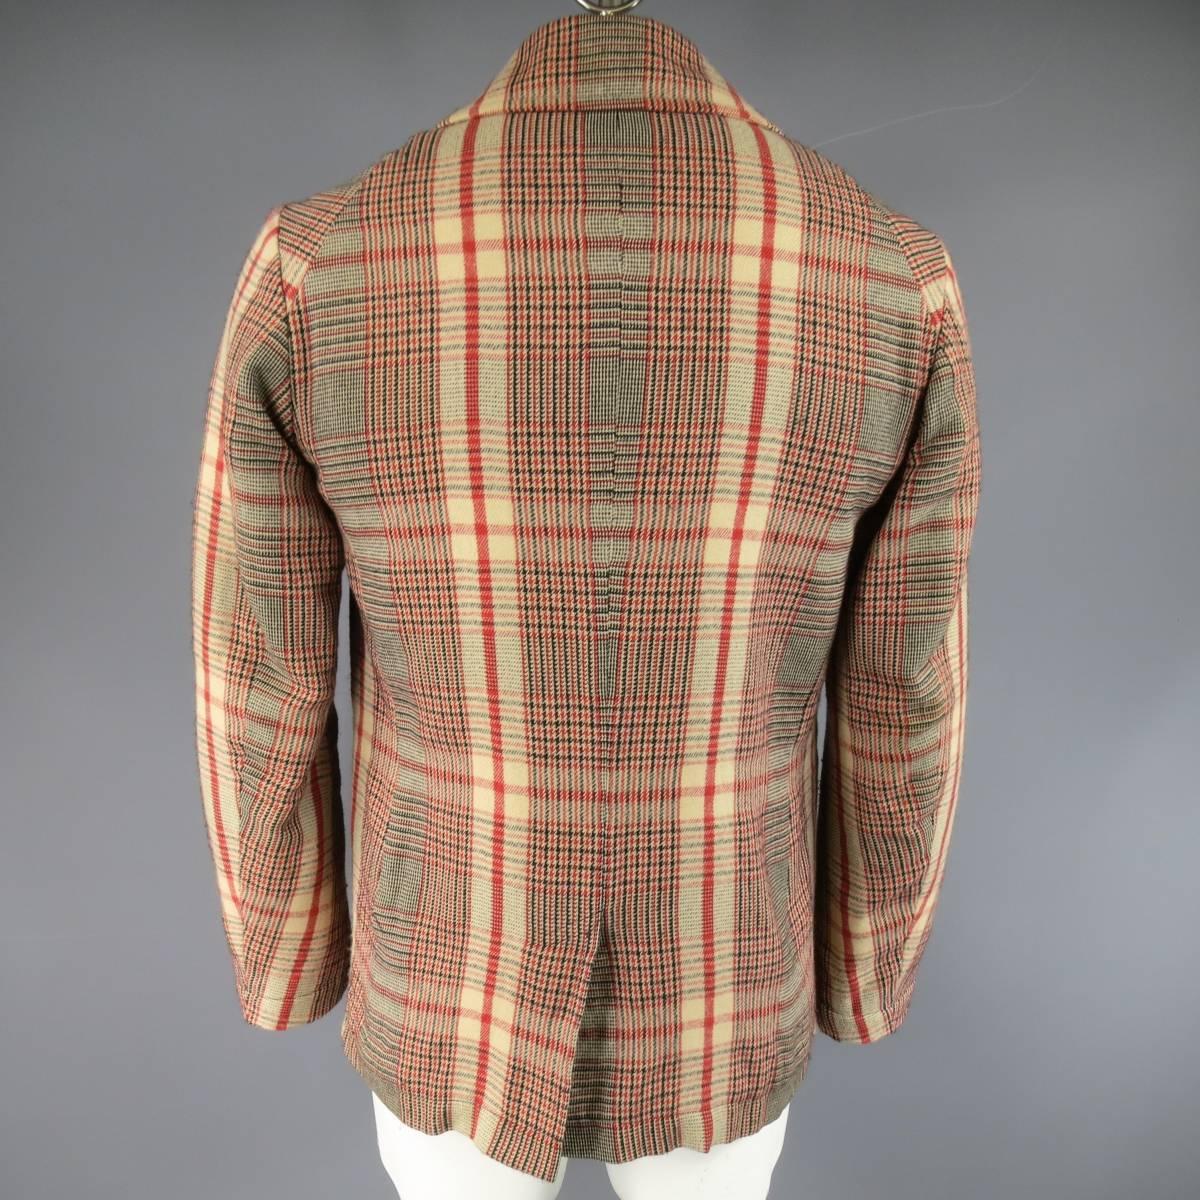 ALEXANDER MCQUEEN peacoat in a light weight, khaki and red glenplaid print, cotton wool featuring a double breasted closure, classic collar lapel, slit pockets, and quilted lining. Minor pilling throughout. Made in Italy.
 
Good Pre-Owned